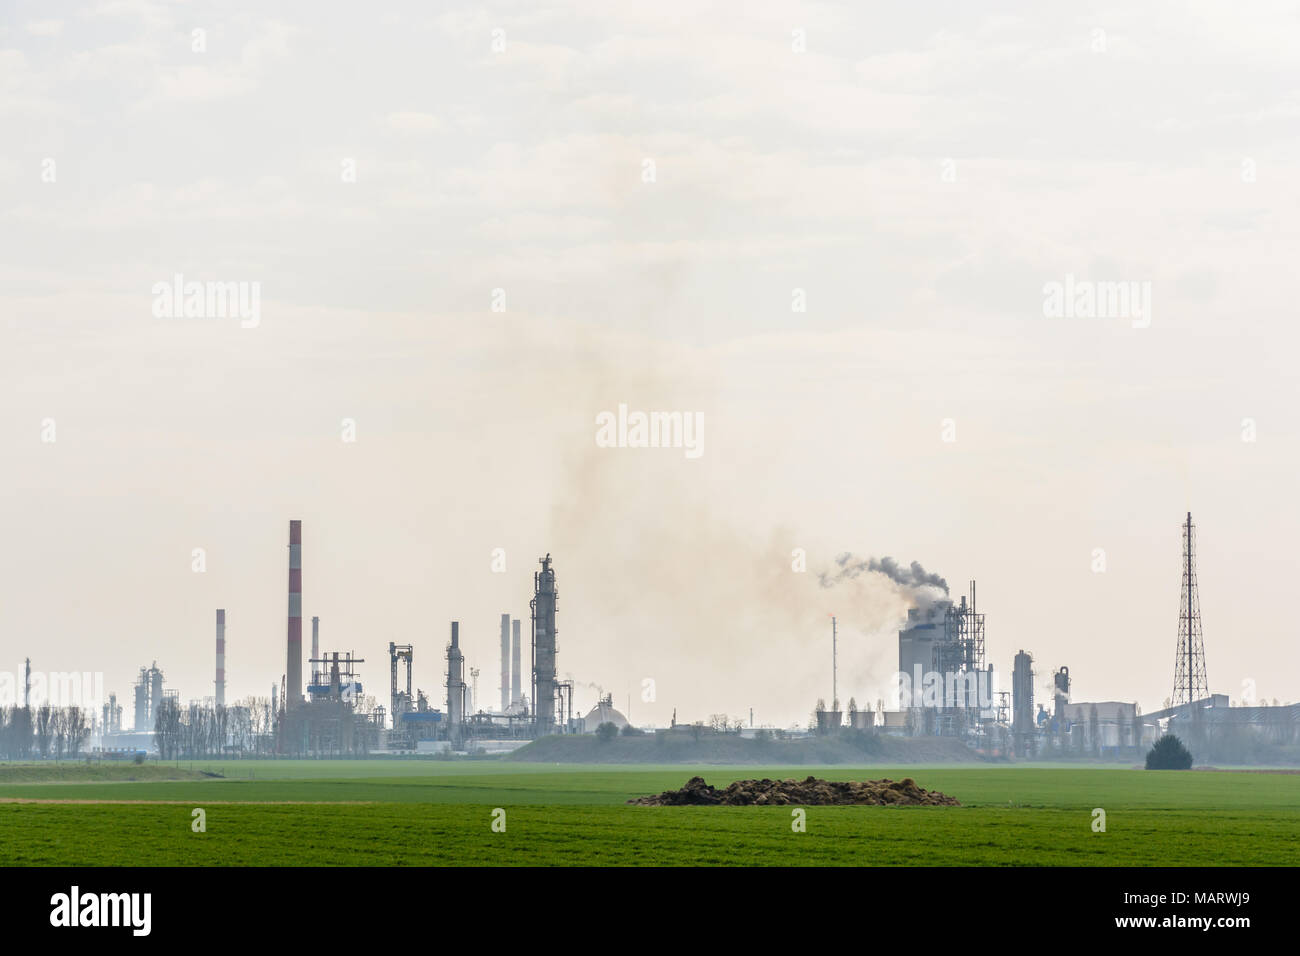 An oil refinery with smoking chimneys releasing toxic gases in the air, surrounded by crop fields in the french countryside under a pale sunlight. Stock Photo